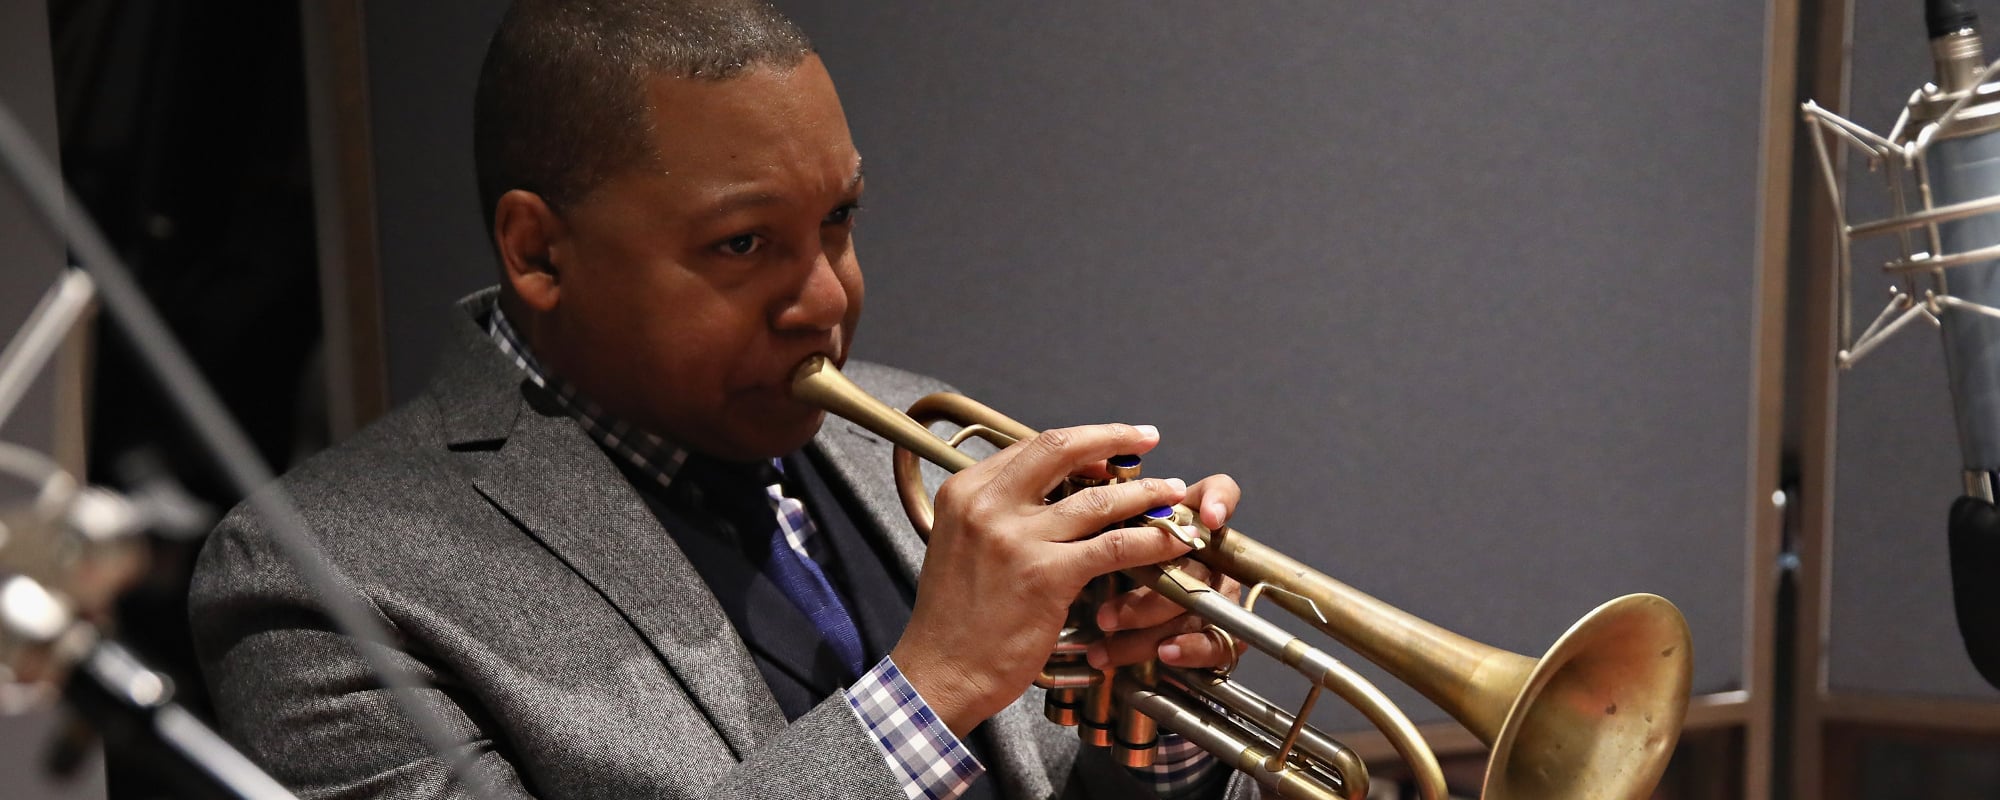 Jazz at Lincoln Center Reopens, Set to Celebrate Wynton Marsalis’ 60th